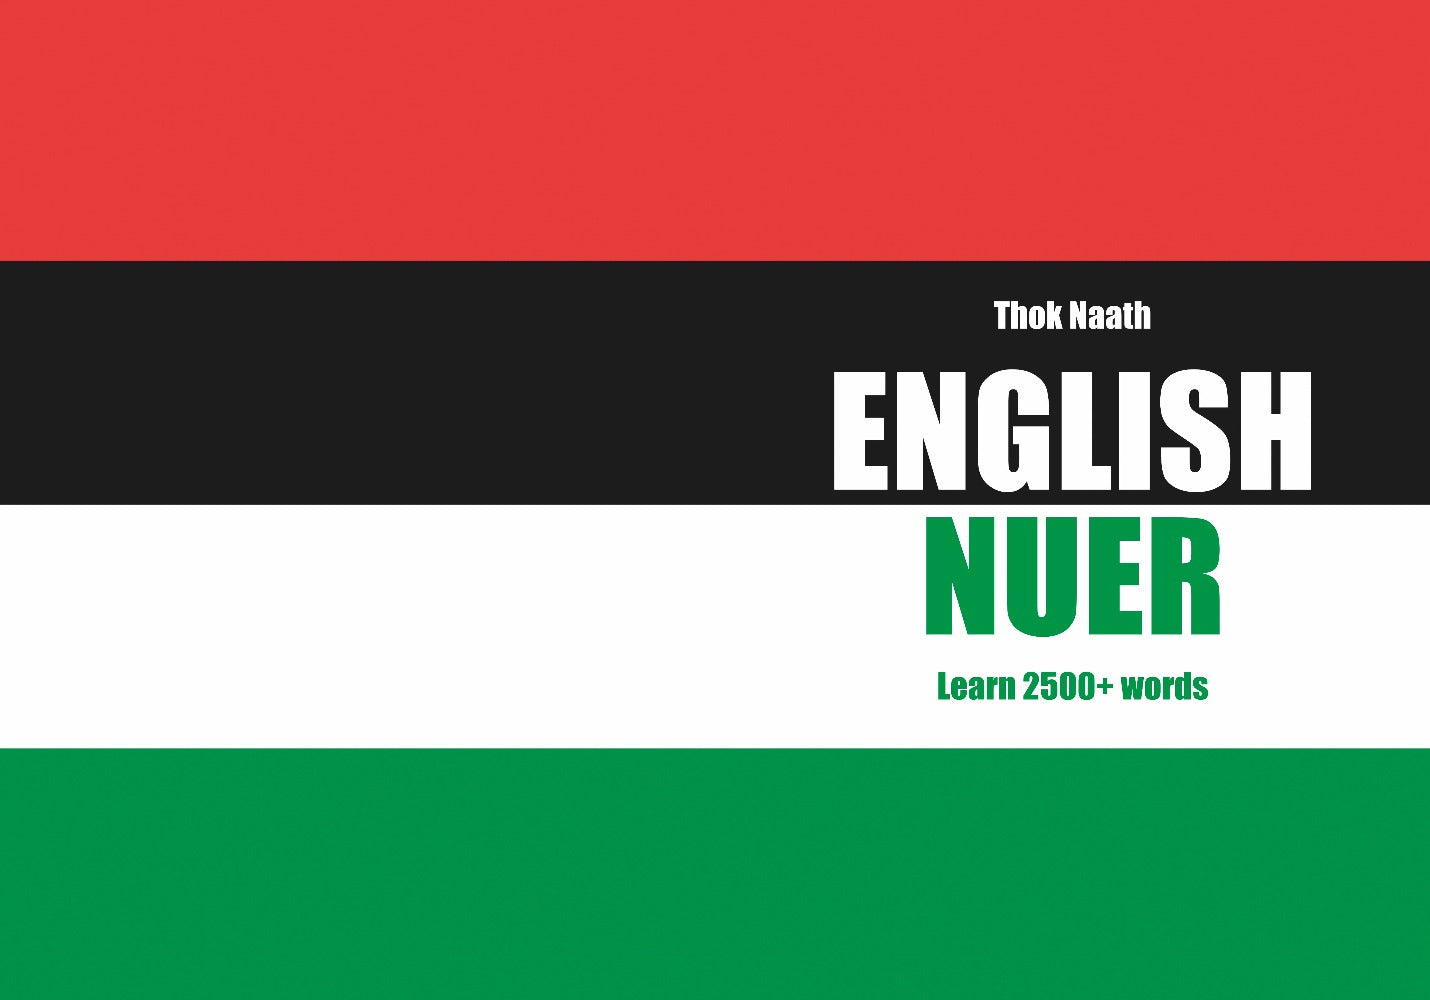 Nuer language learning notebook cover